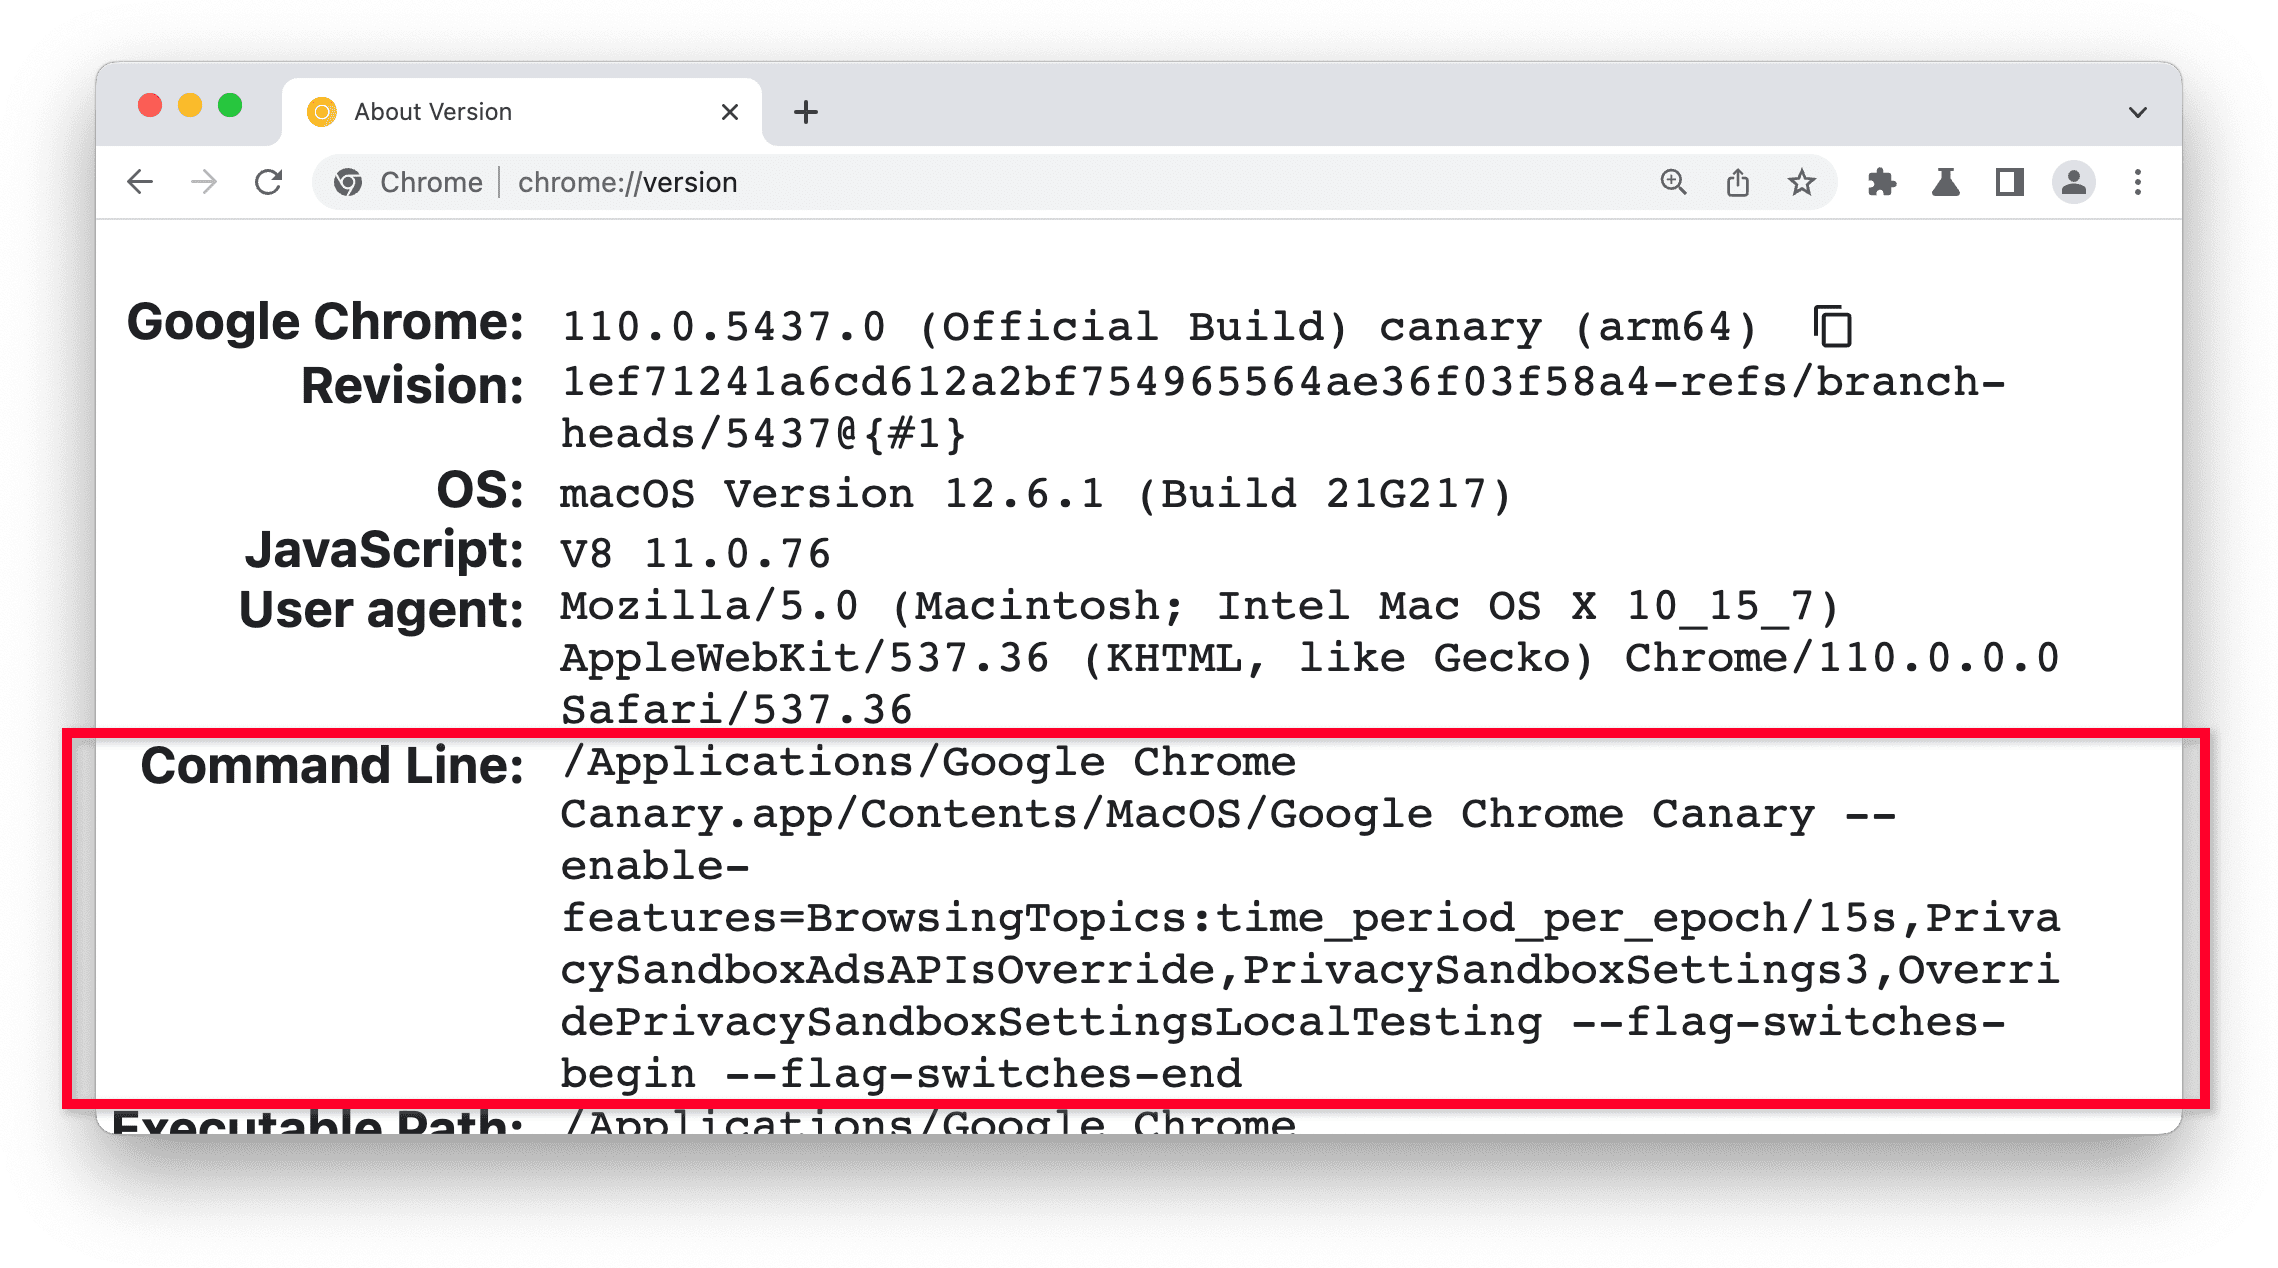 chrome://version page
in Chrome Canary, Command Line section highlighted.